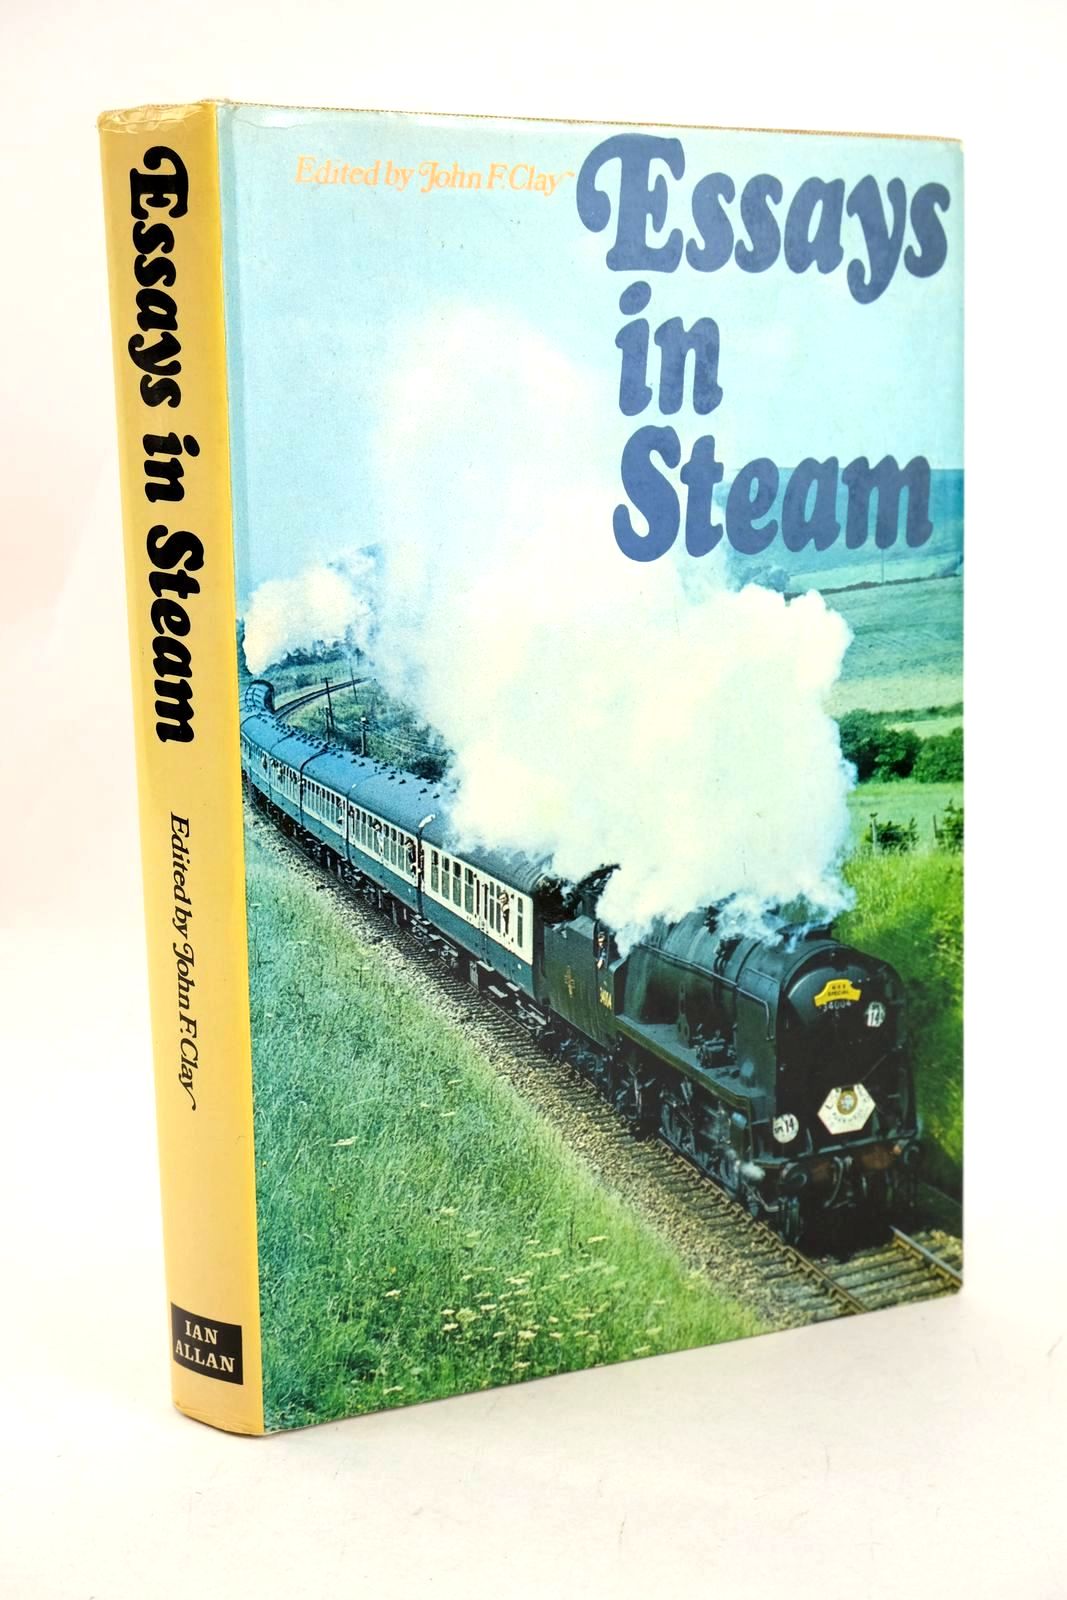 Photo of ESSAYS IN STEAM written by Clay, John F. published by Ian Allan Ltd. (STOCK CODE: 1326936)  for sale by Stella & Rose's Books